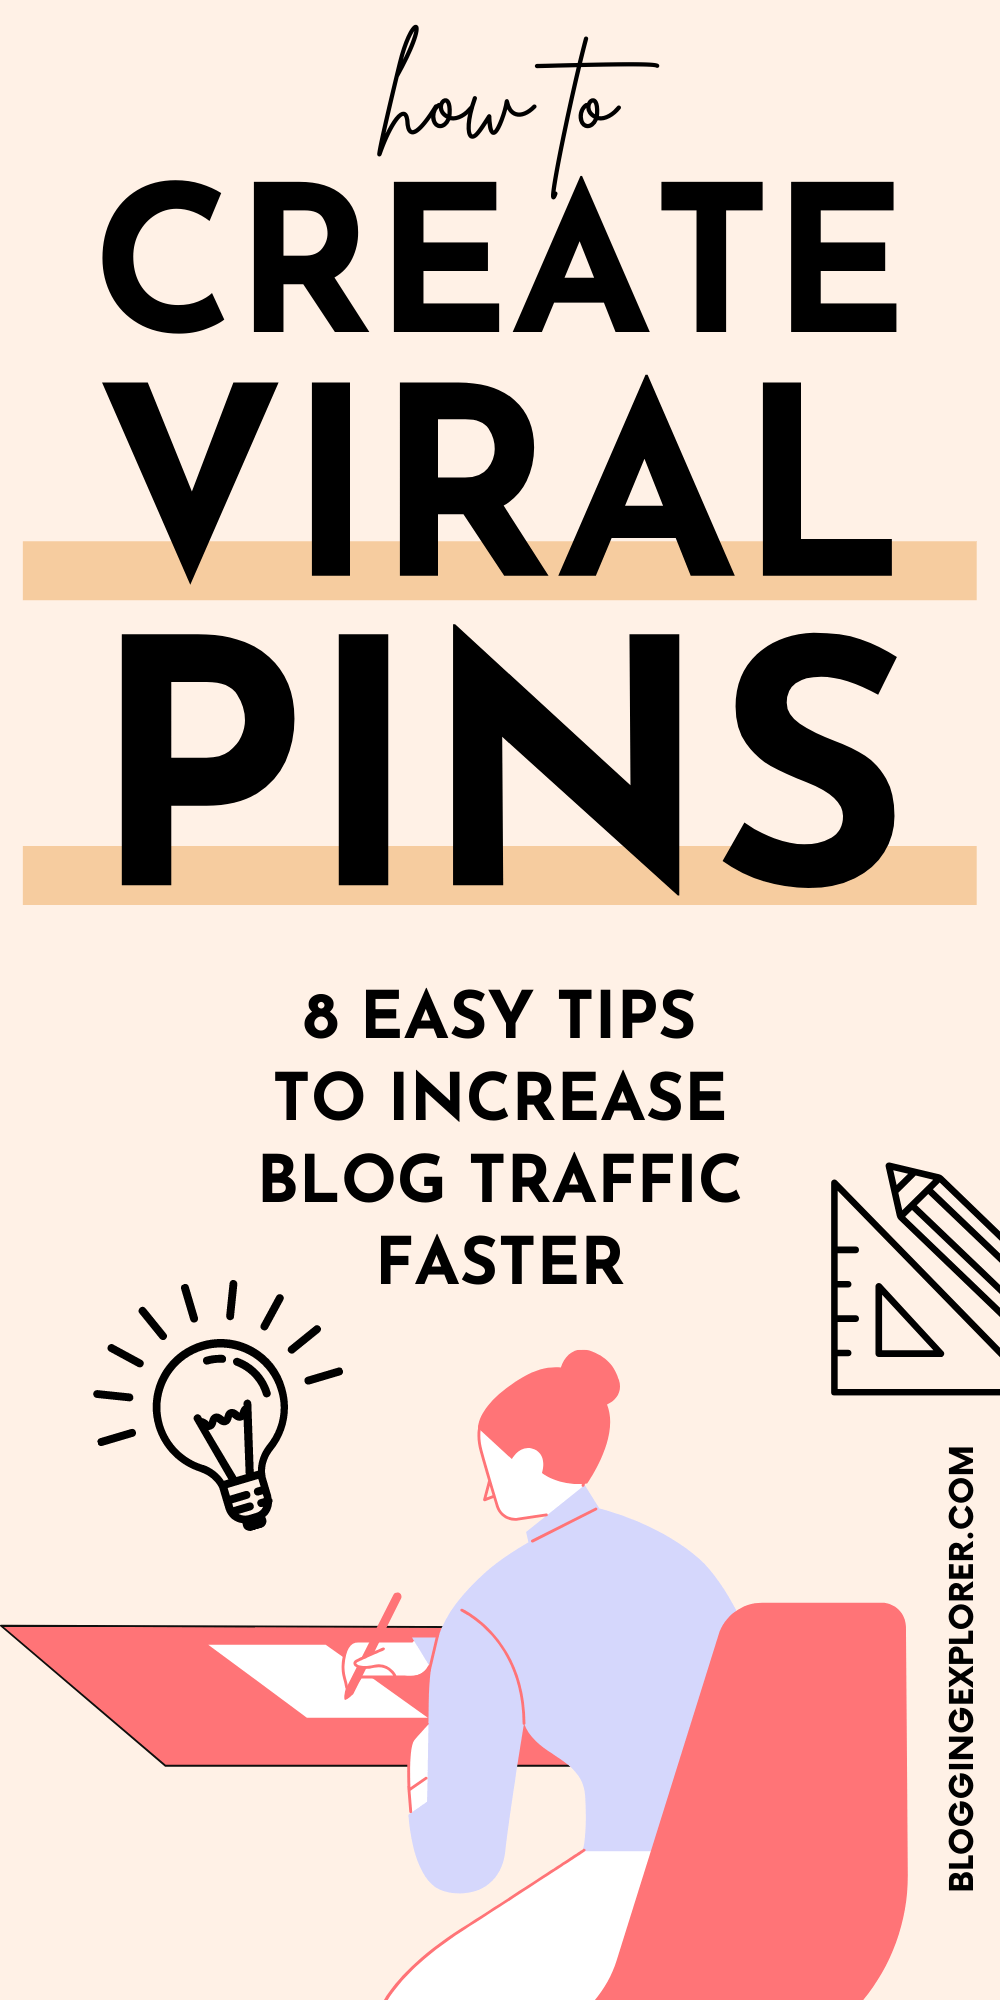 How to Design Viral Pins for Pinterest: The Ultimate Guide (In 2023)